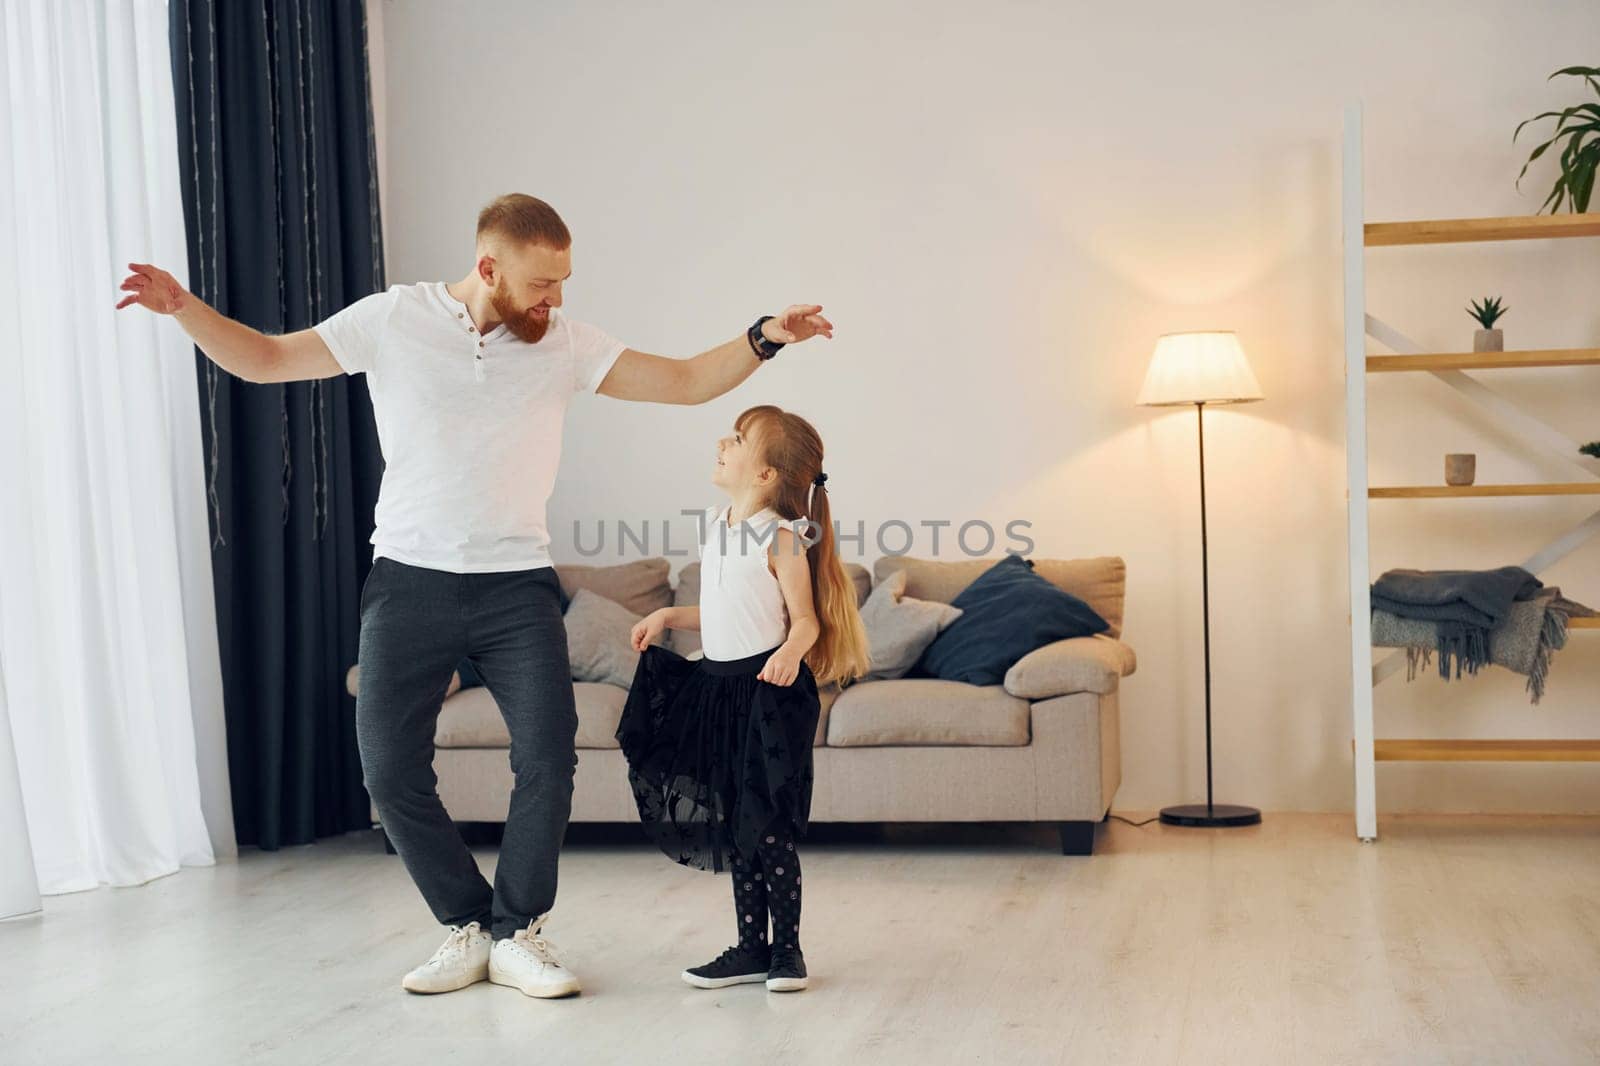 Yoga poses. Father with his little daughter is at home together by Standret